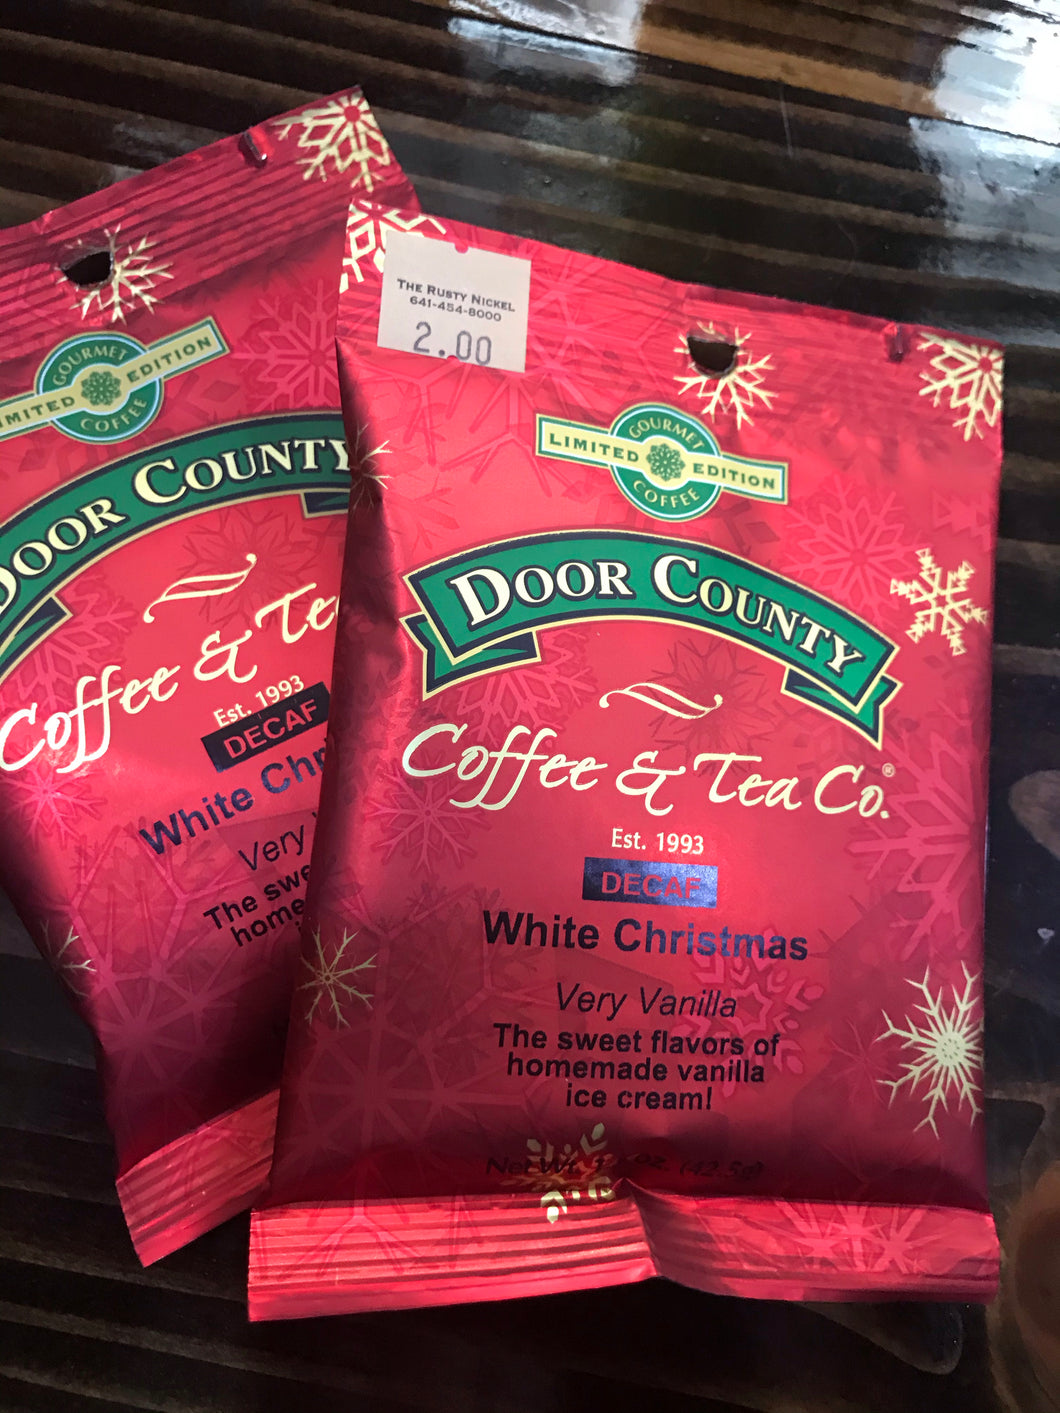 Door County Coffee 1.5 oz Pack of Decaf White Christmas